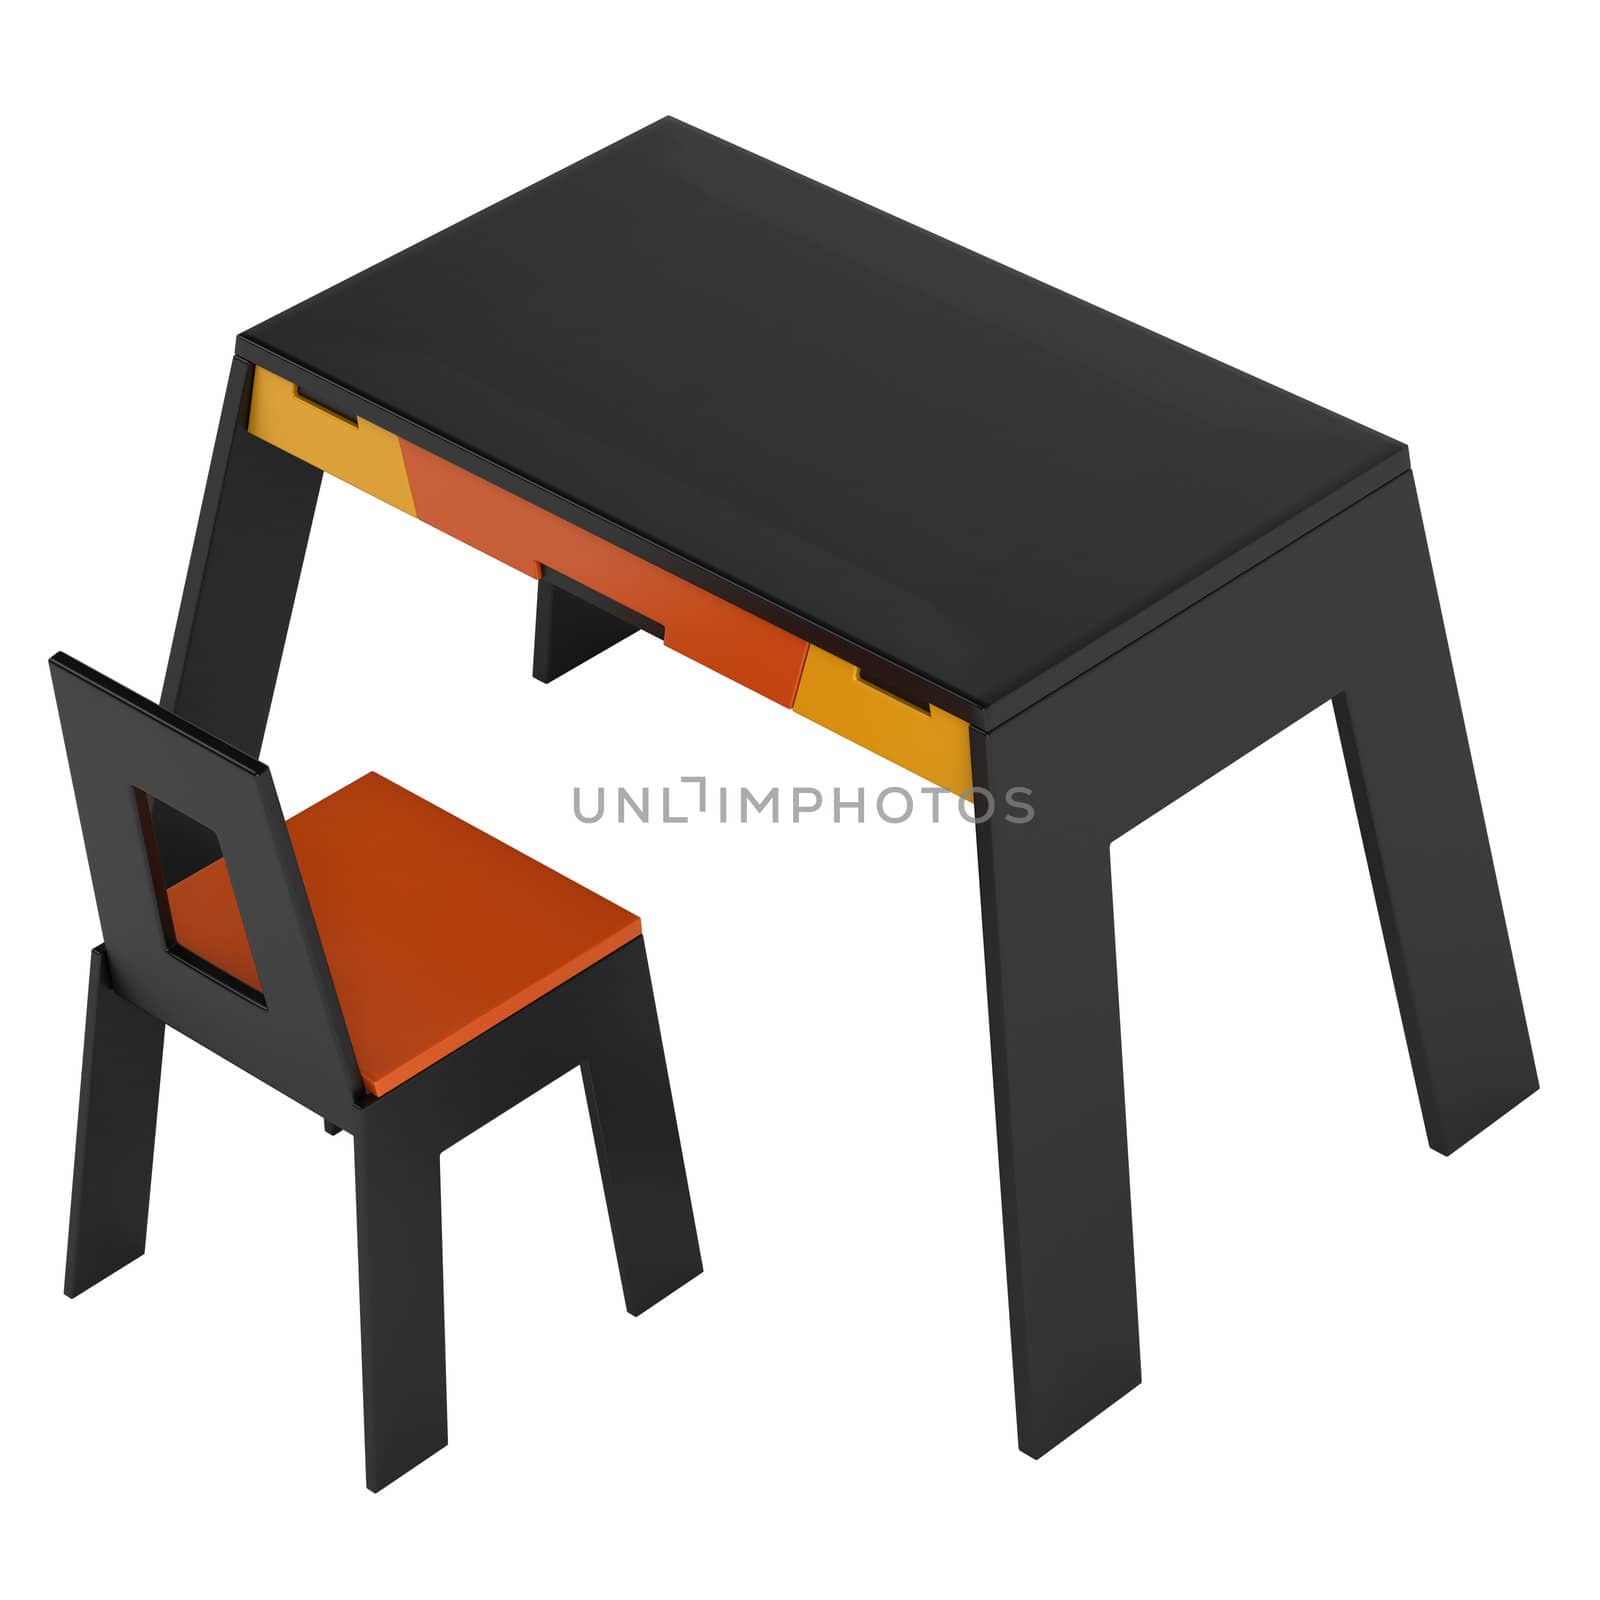 Matching black modern table and chair with orange and yellow decoration isolated on a white background